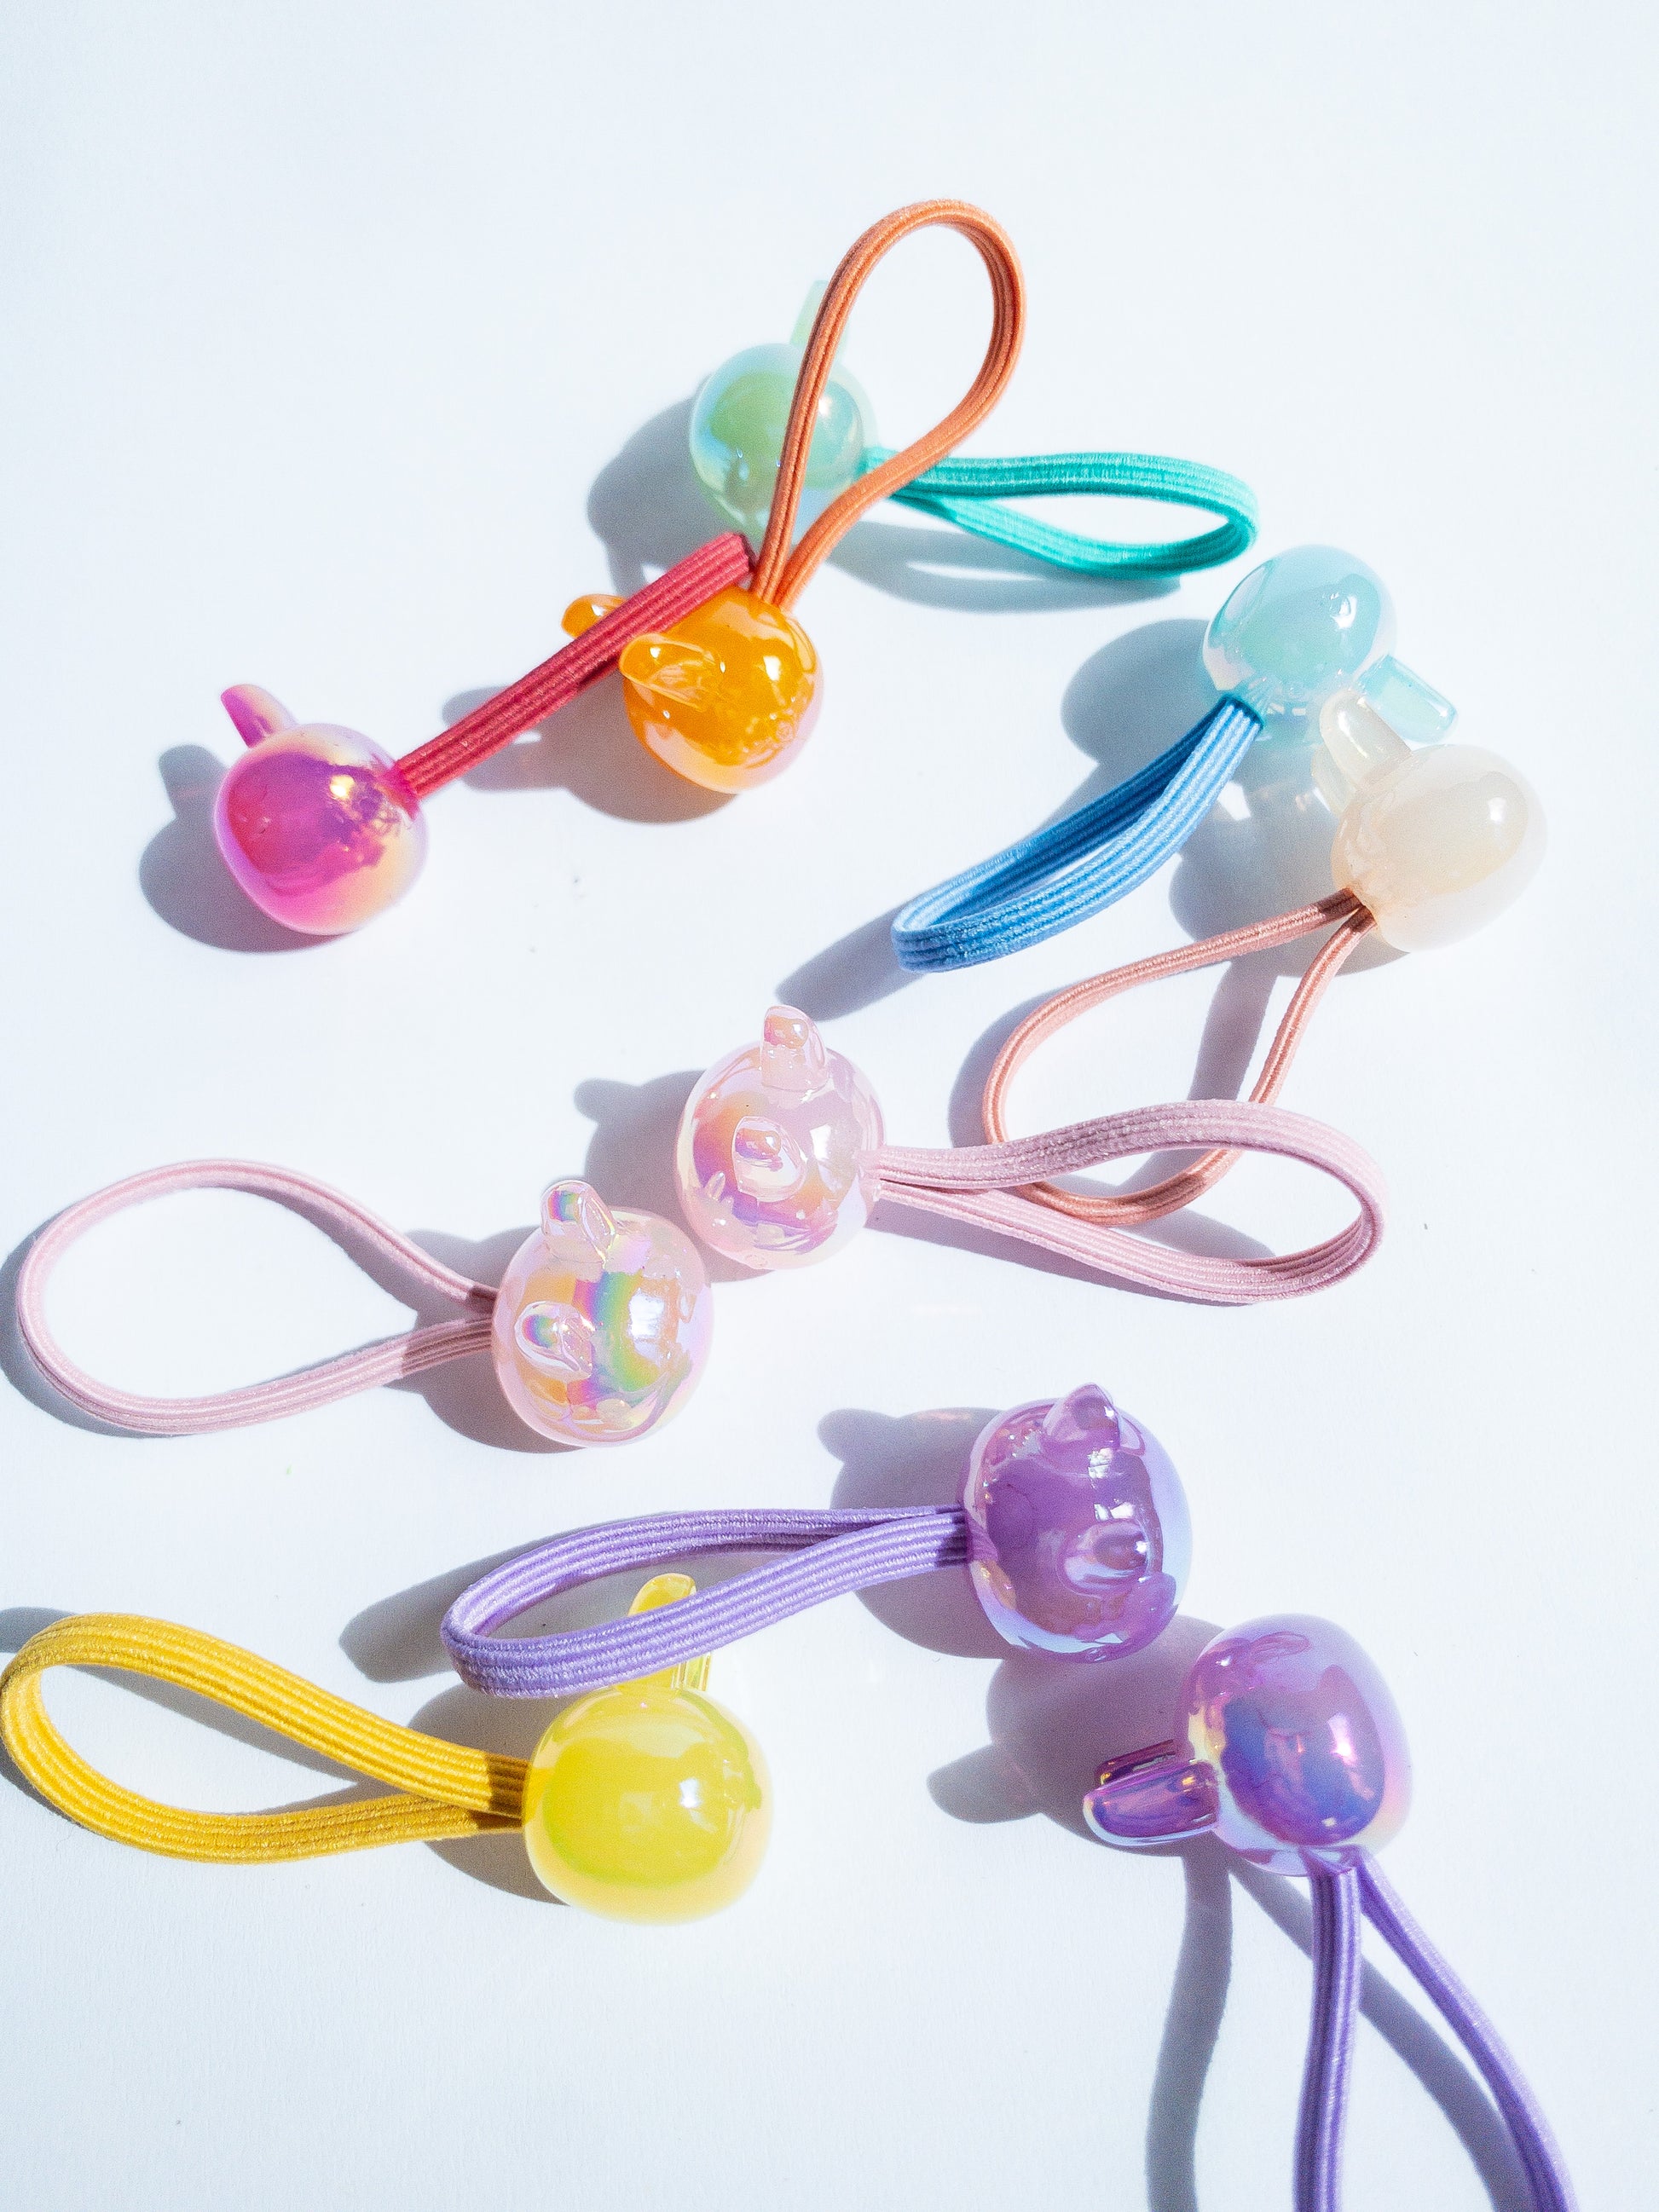 Dreamy, iridescent bubble rabbit hair ties! These pearly hair ties glisten and gleam in candy taffy colors. They're strong enough to hold hairstyles and cute enough to wear them all at once. Each set contains 10 hair ties.